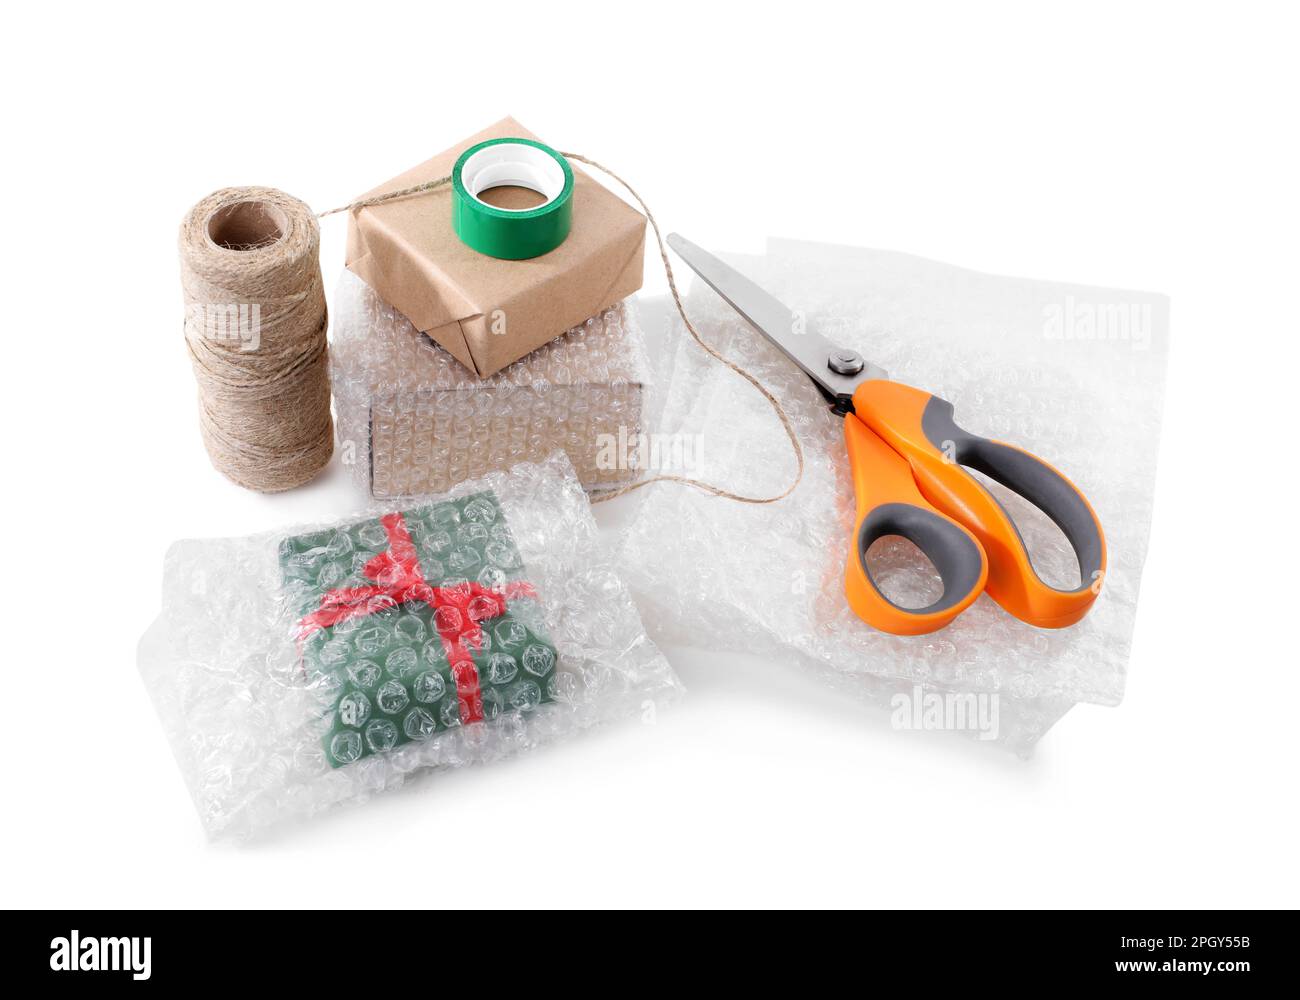 https://c8.alamy.com/comp/2PGY55B/cardboard-boxes-bubble-wrap-scissors-and-adhesive-tape-on-white-background-2PGY55B.jpg